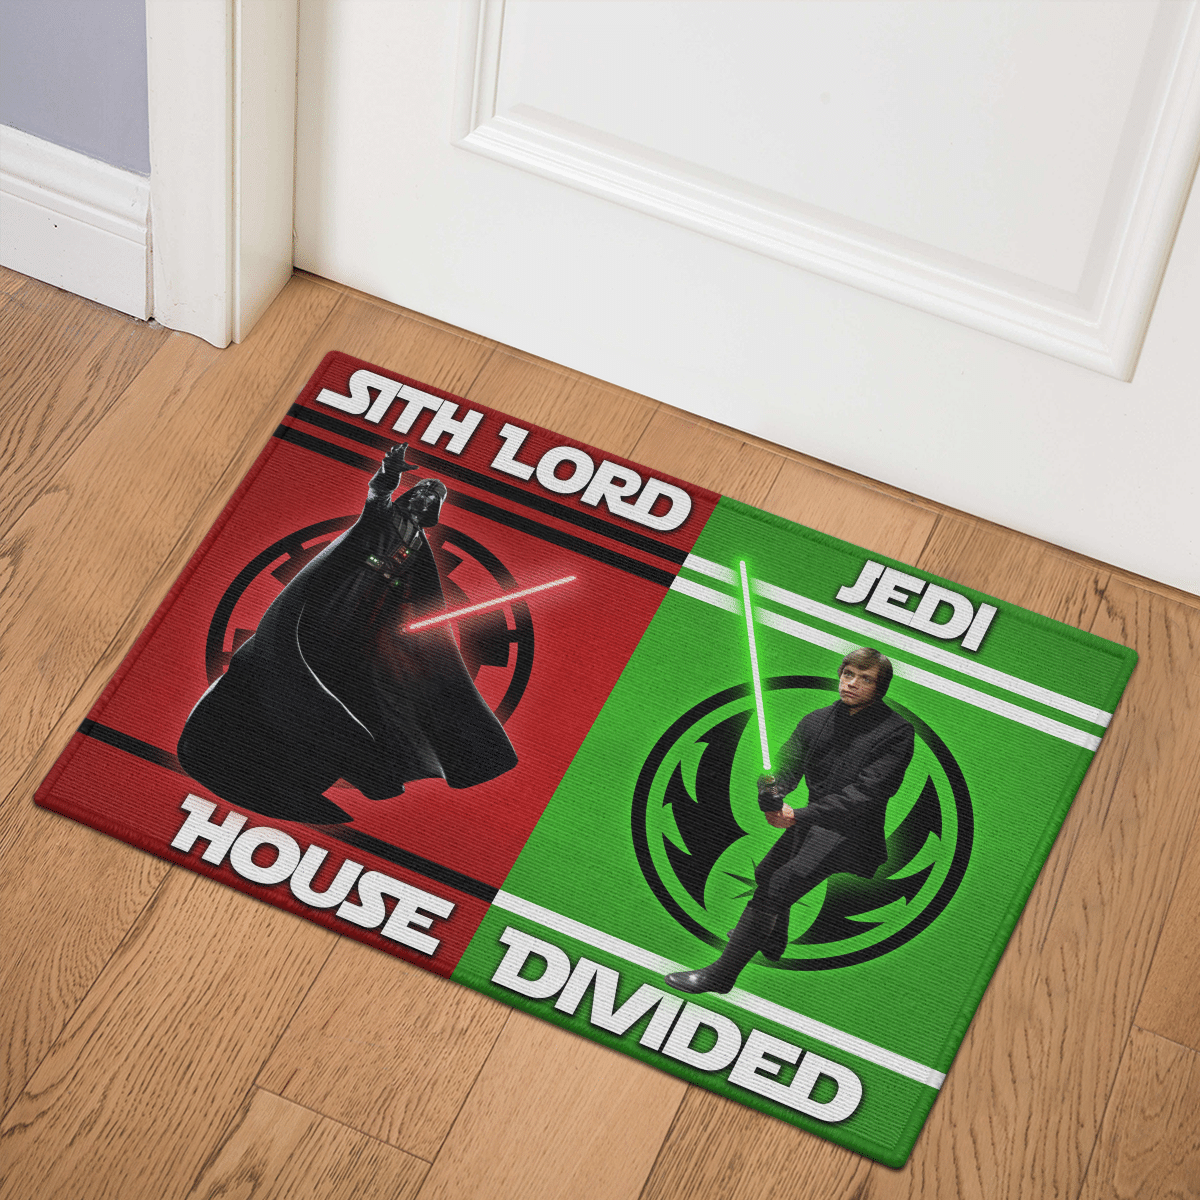 Sith Lord and Jedi house divided doormat